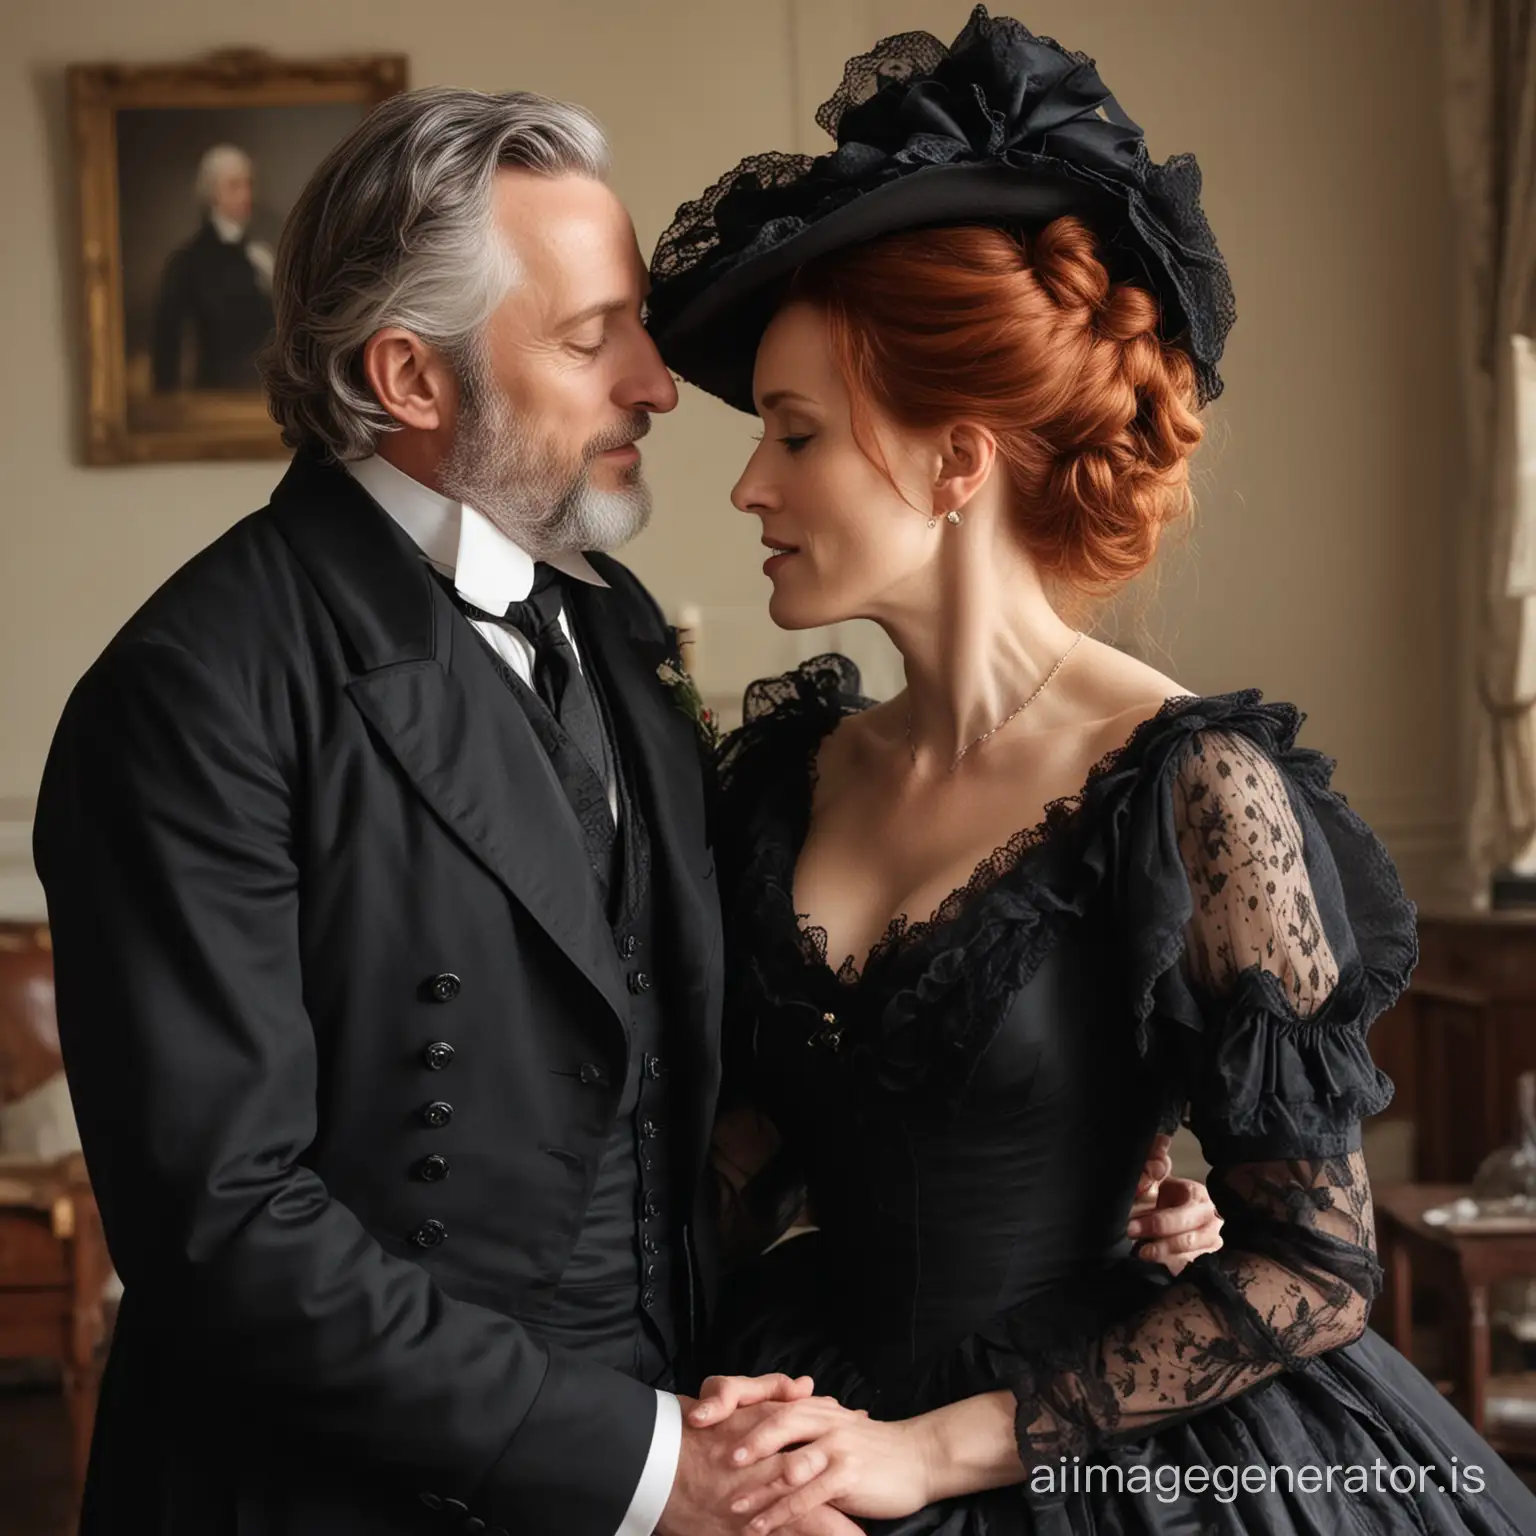 red hair Gillian Anderson wearing a black floor-length loose billowing 1860 victorian crinoline dress with a frilly bonnet kissing an old dressed man dressed into a black victorian suit who seems to be her newlywed husband
